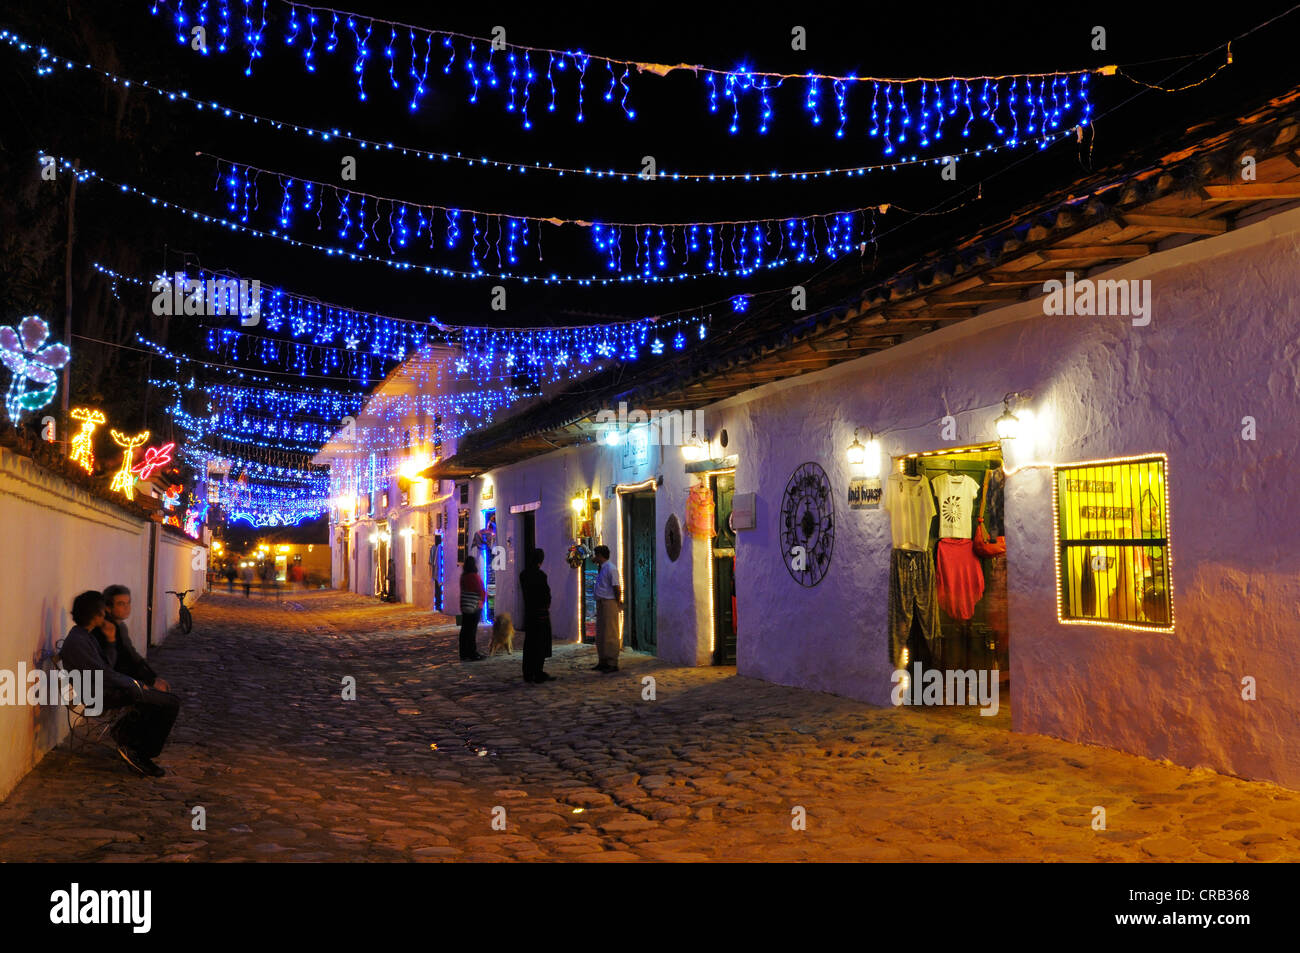 Alleyway with chains of lights in Villa de Leyva in the evening, colonial buildings, Boyaca department, Colombia, South America Stock Photo